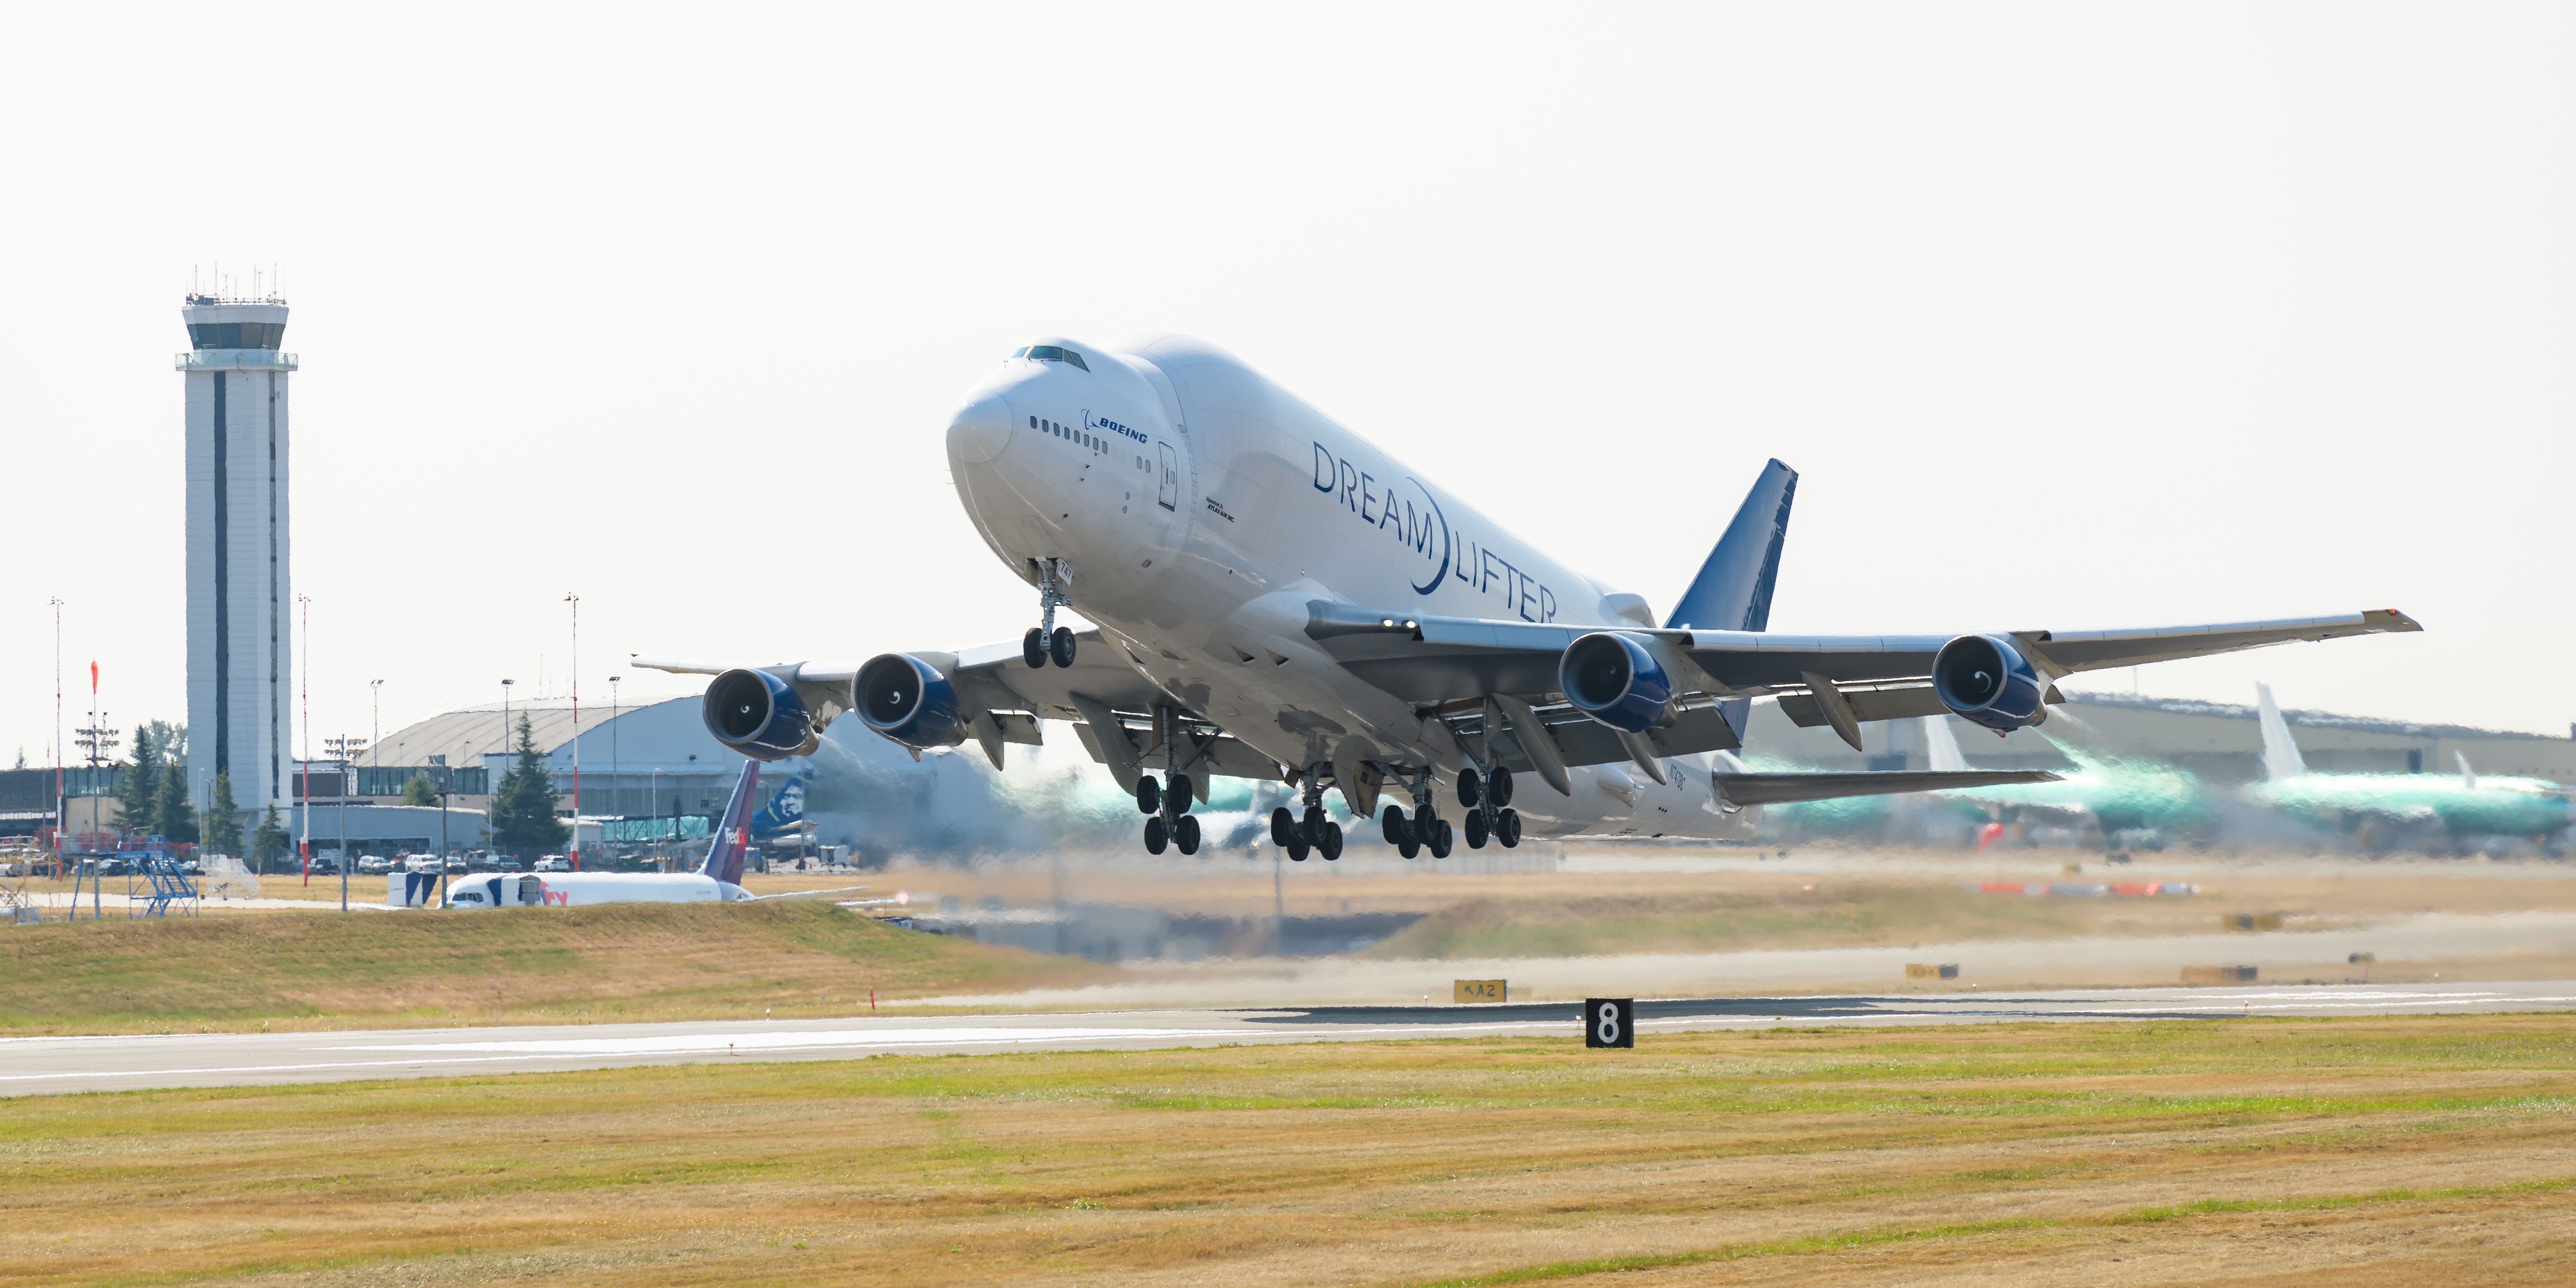 A Boeing Dreamlifter just after taking off.